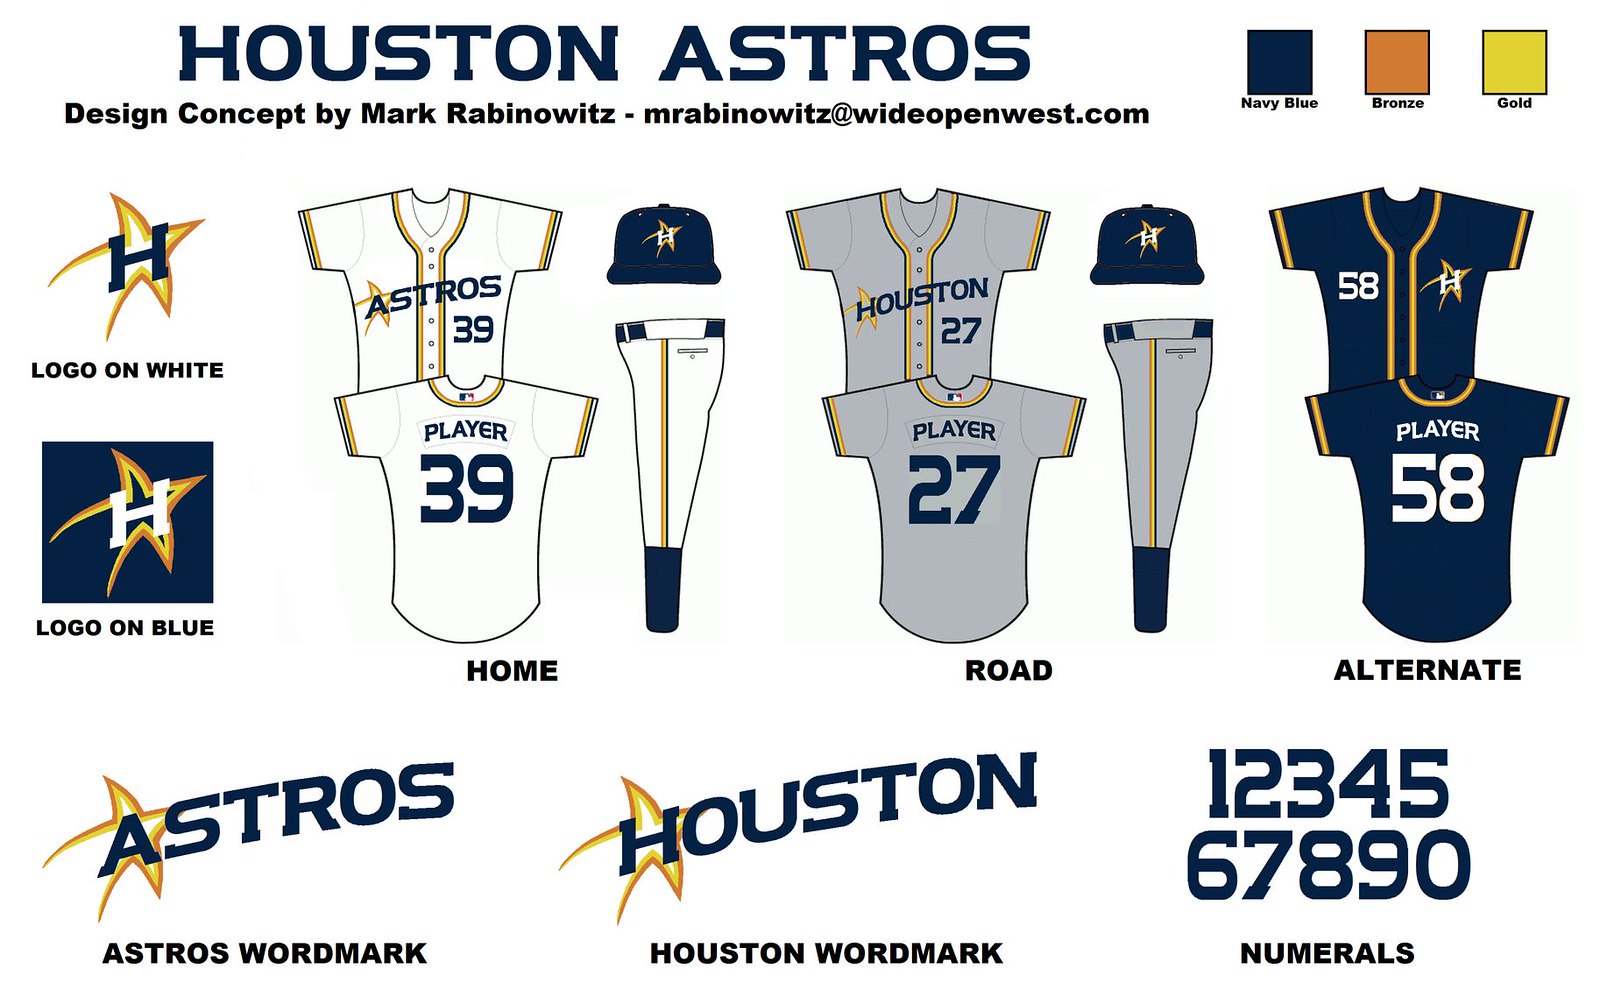 Astros new uniforms will have 'some of the colors' from the past